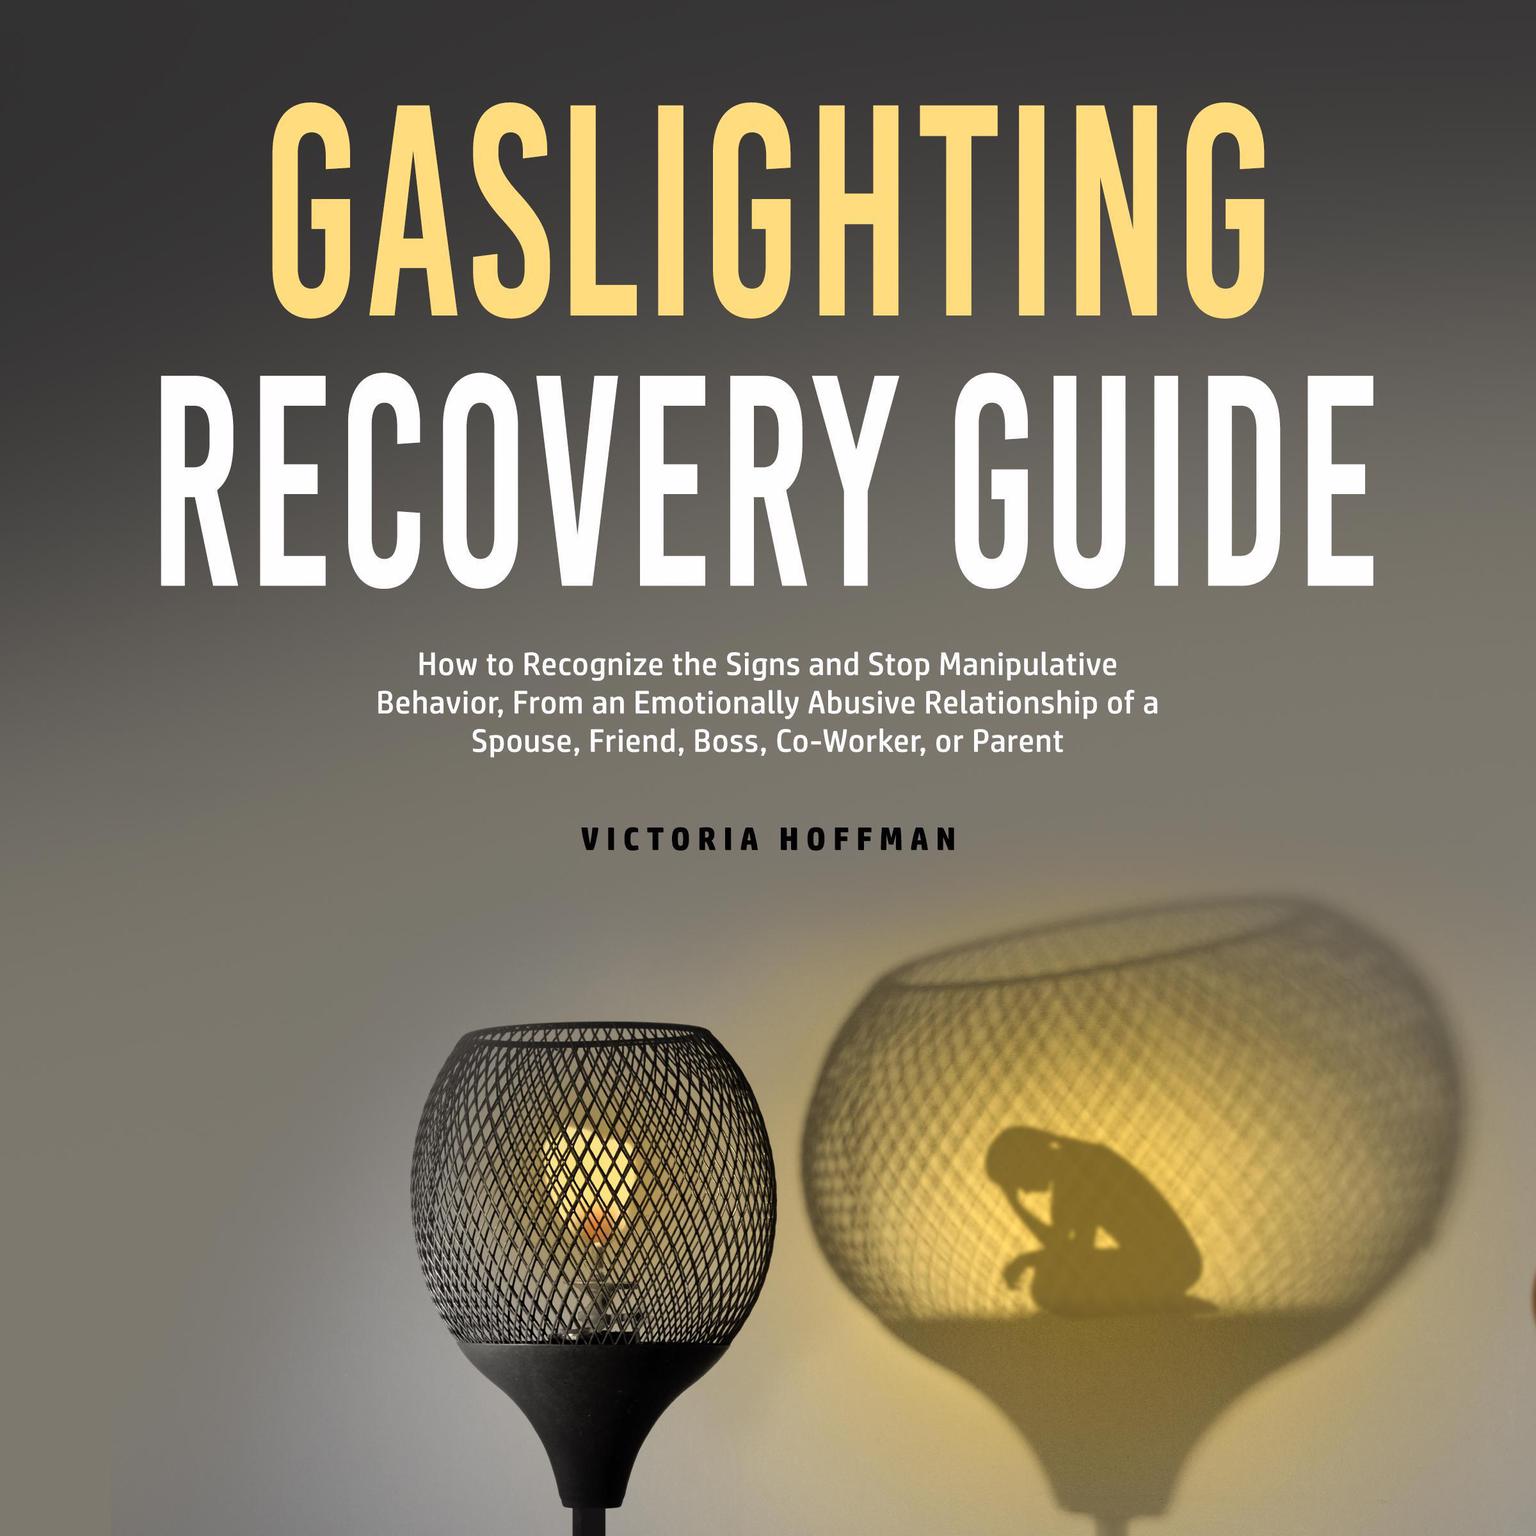 Gaslighting Recovery Guide: How to Recognize the Signs and Stop Manipulative Behavior in an Emotionally Abusive Relationship with a Spouse, Friend, Boss, Co-Worker, or Parent Audiobook, by Victoria Hoffman